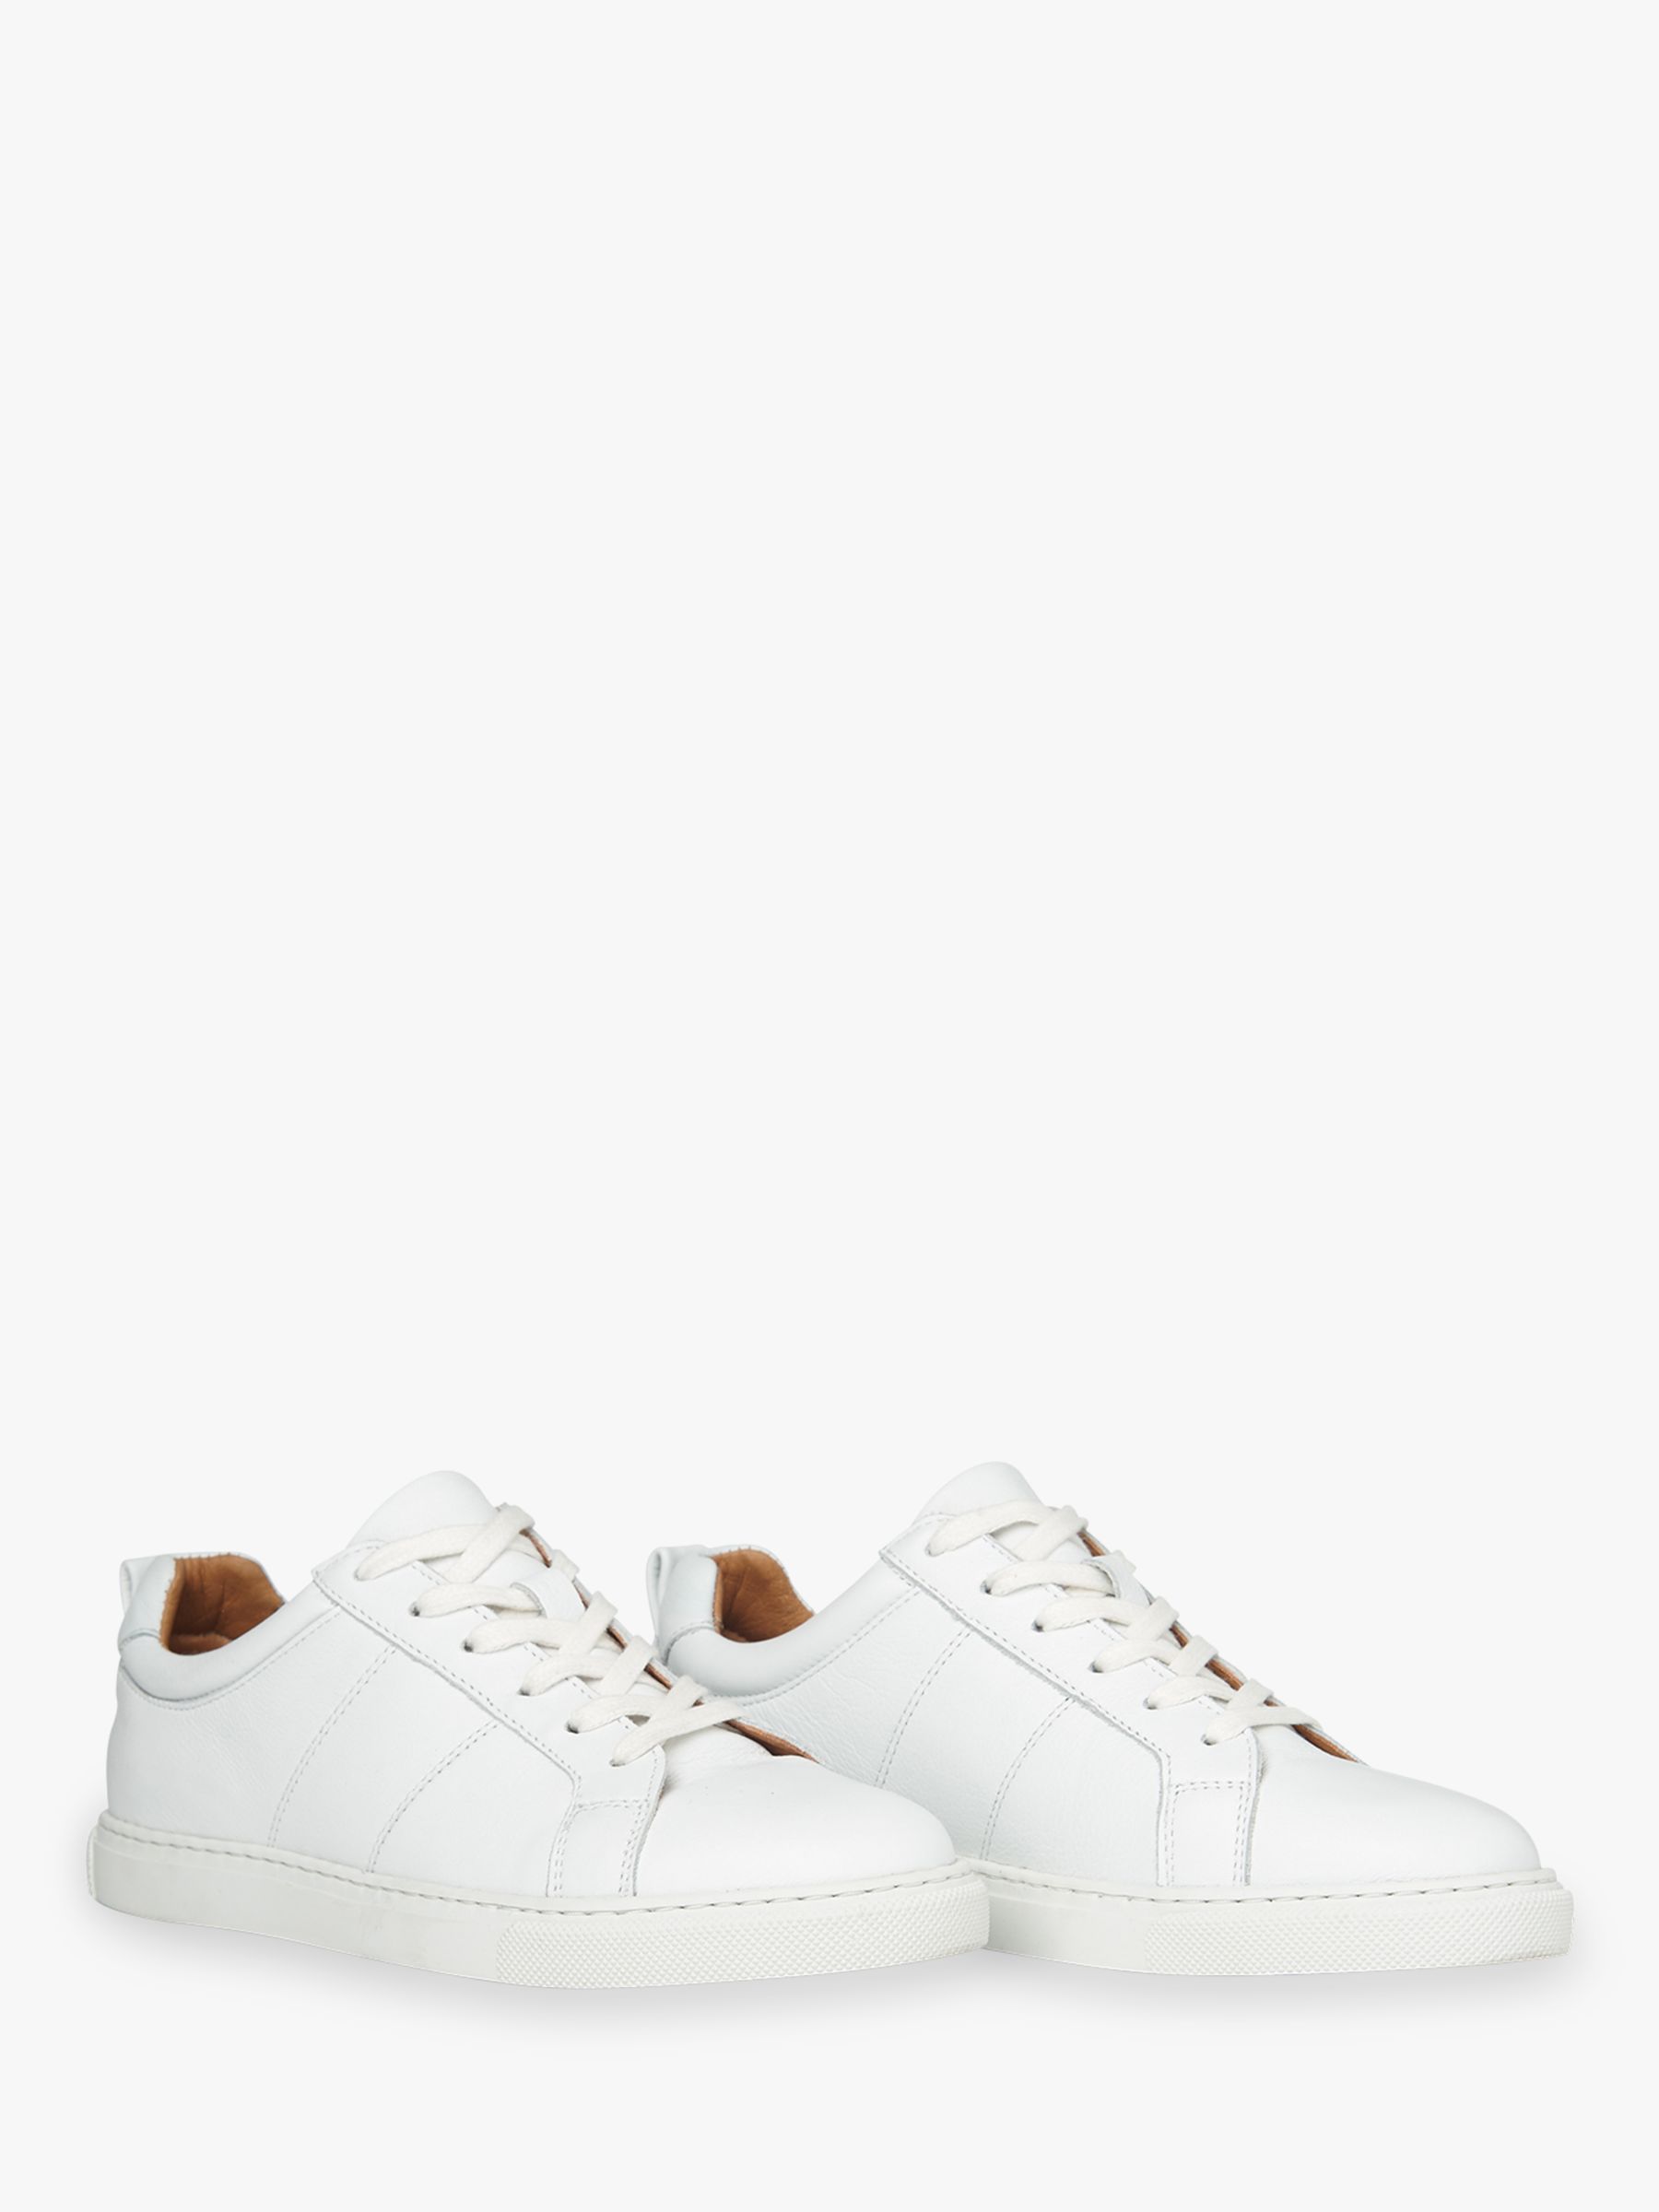 Whistles Koki Lace Up Leather Trainers, White at John Lewis & Partners